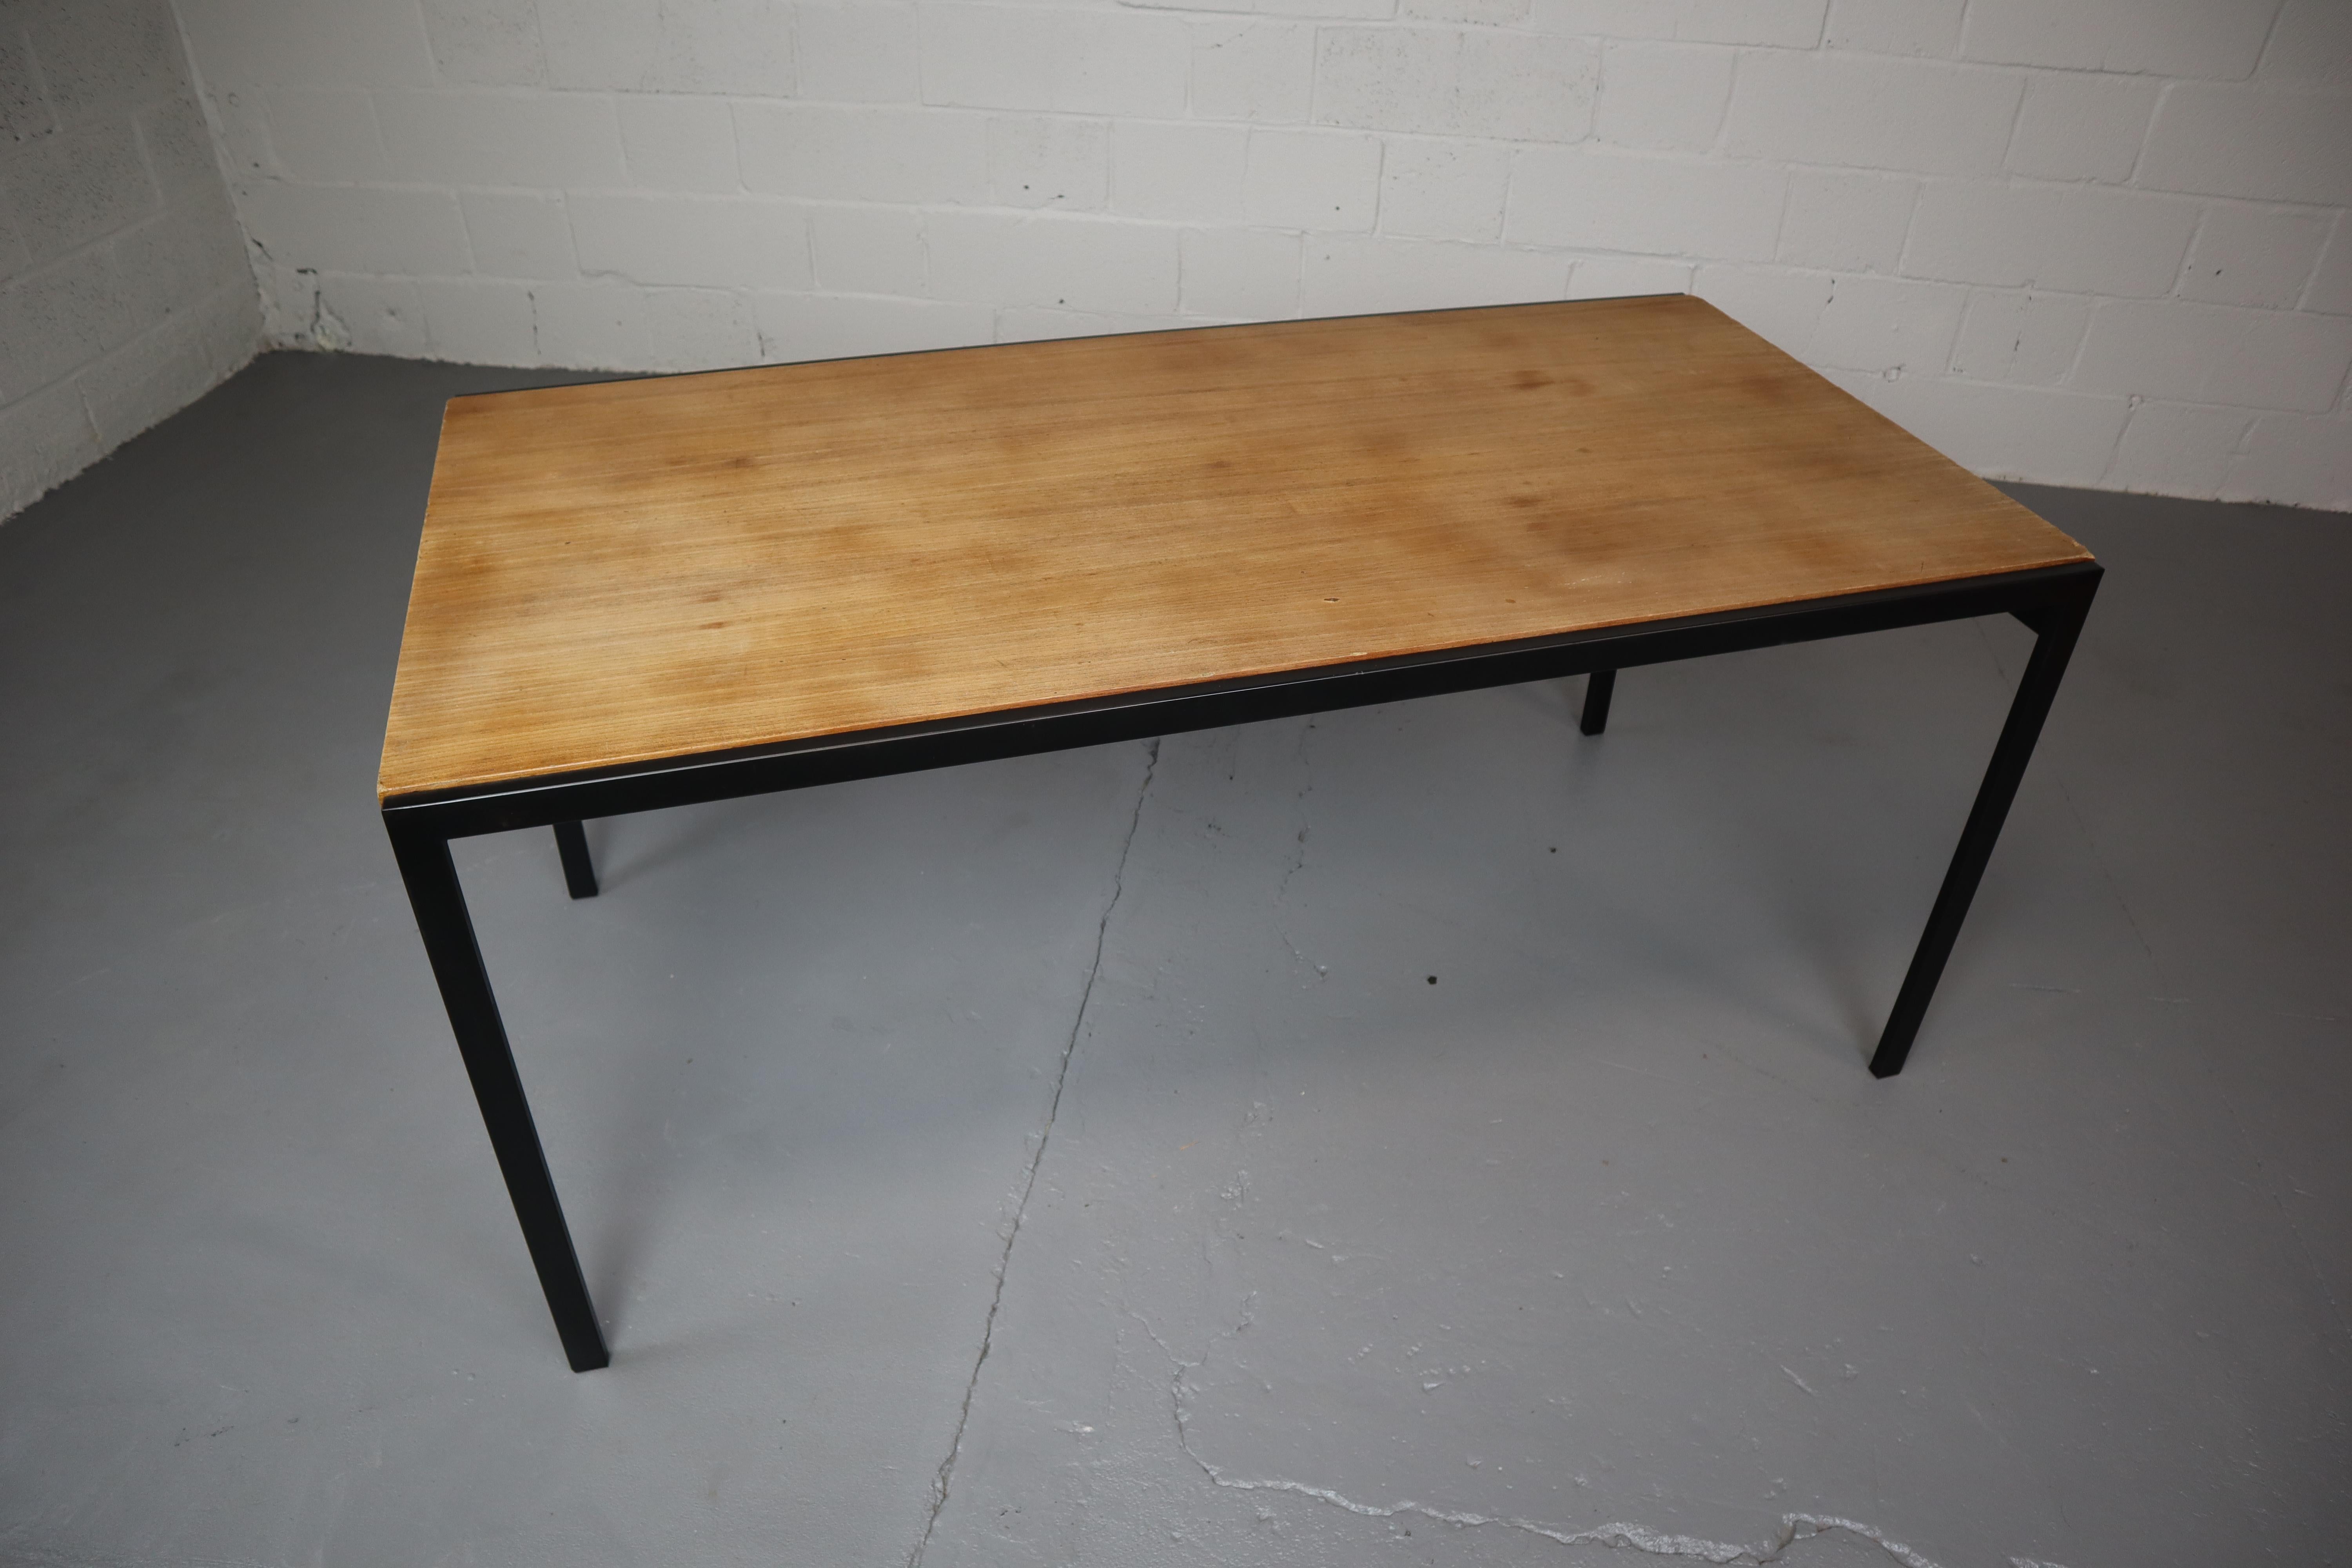 Dutch vintage design dining table from the early sixties. The table, TU30, was designed by Cees Braakman as part of the Japanese series that he designed for Pastoe furniture. Minimalist design with a black metal frame and Teak veneer